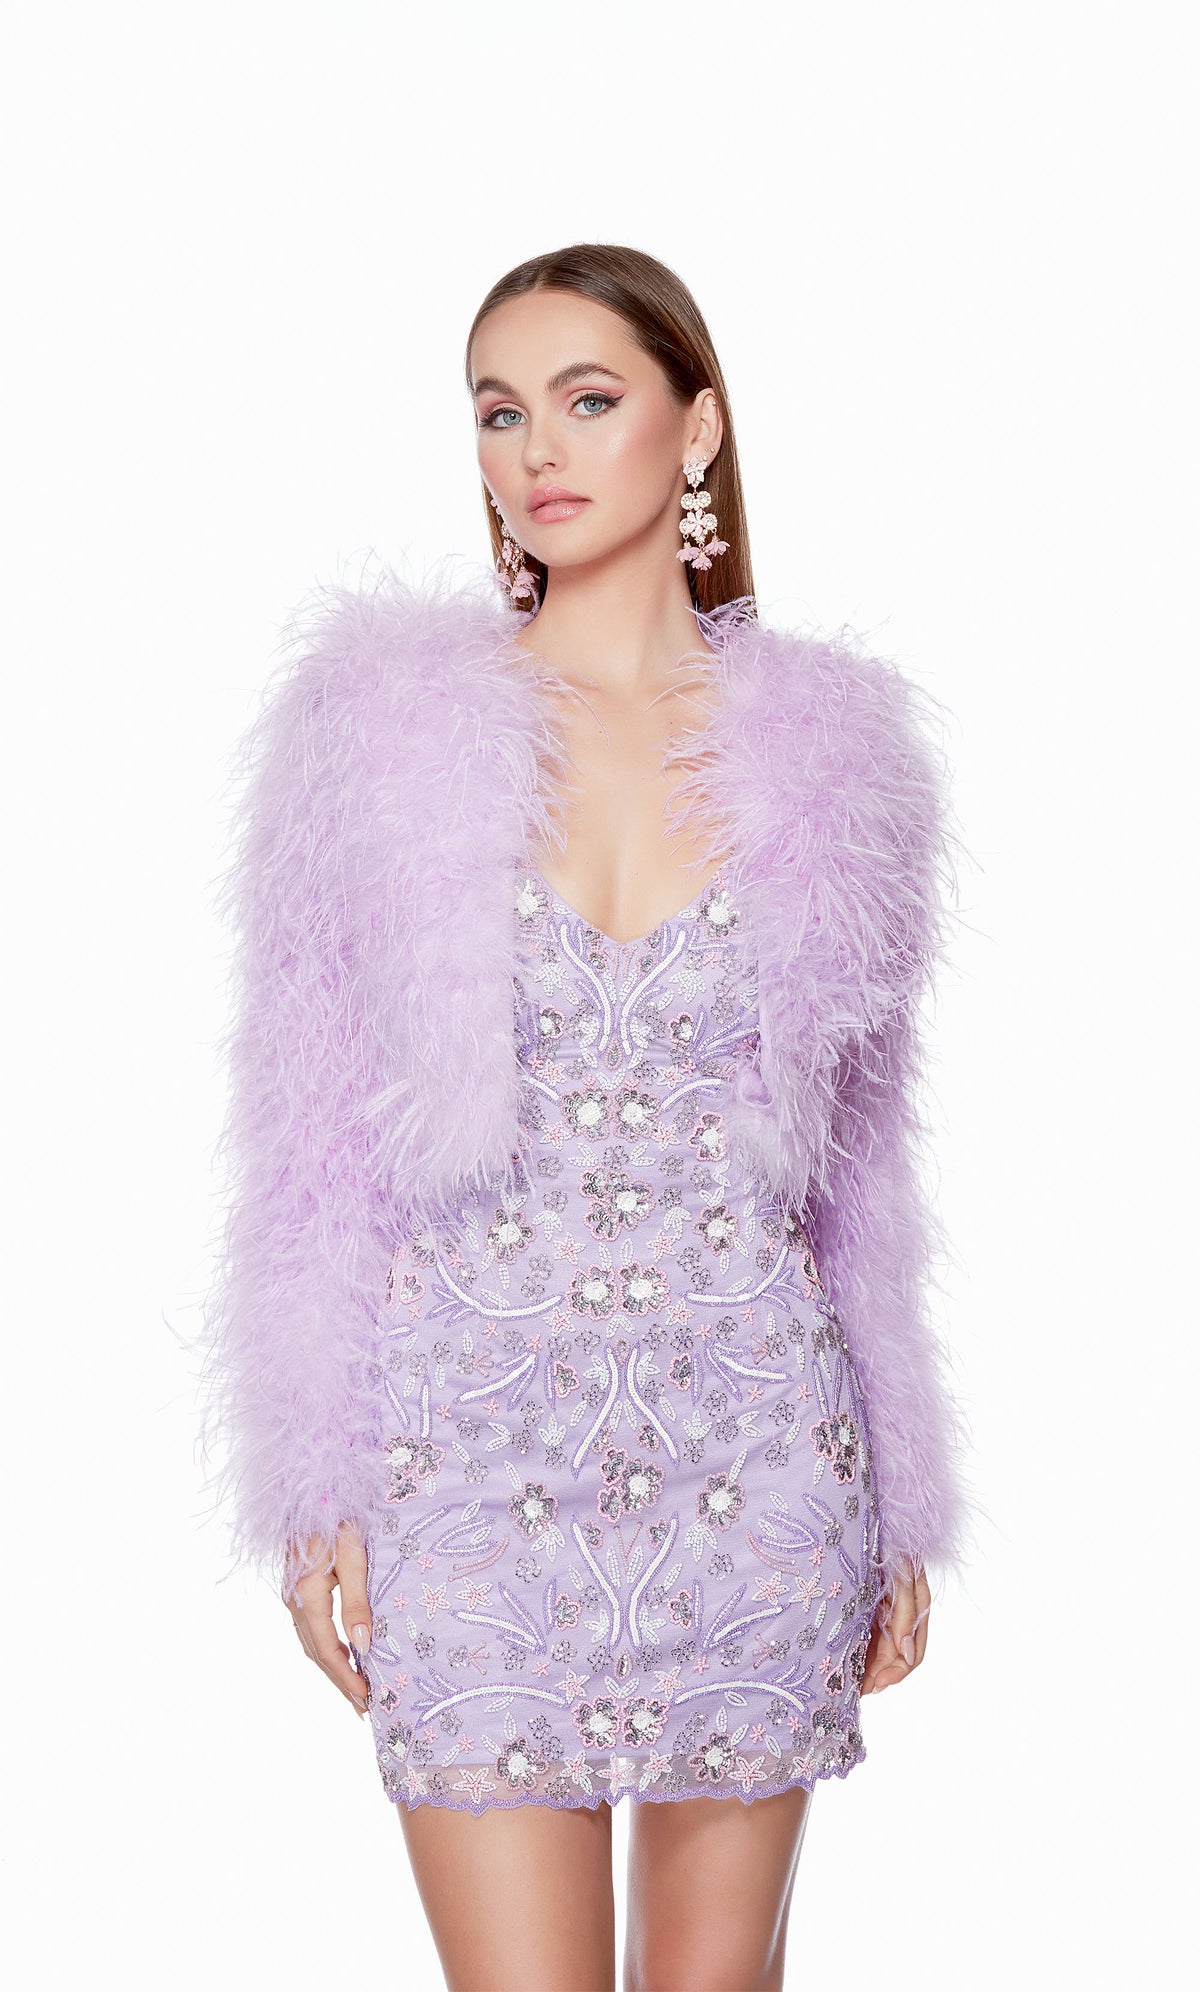 An eye catching light purple cropped feather jacket with long sleeves, perfect for a formal event or night out.